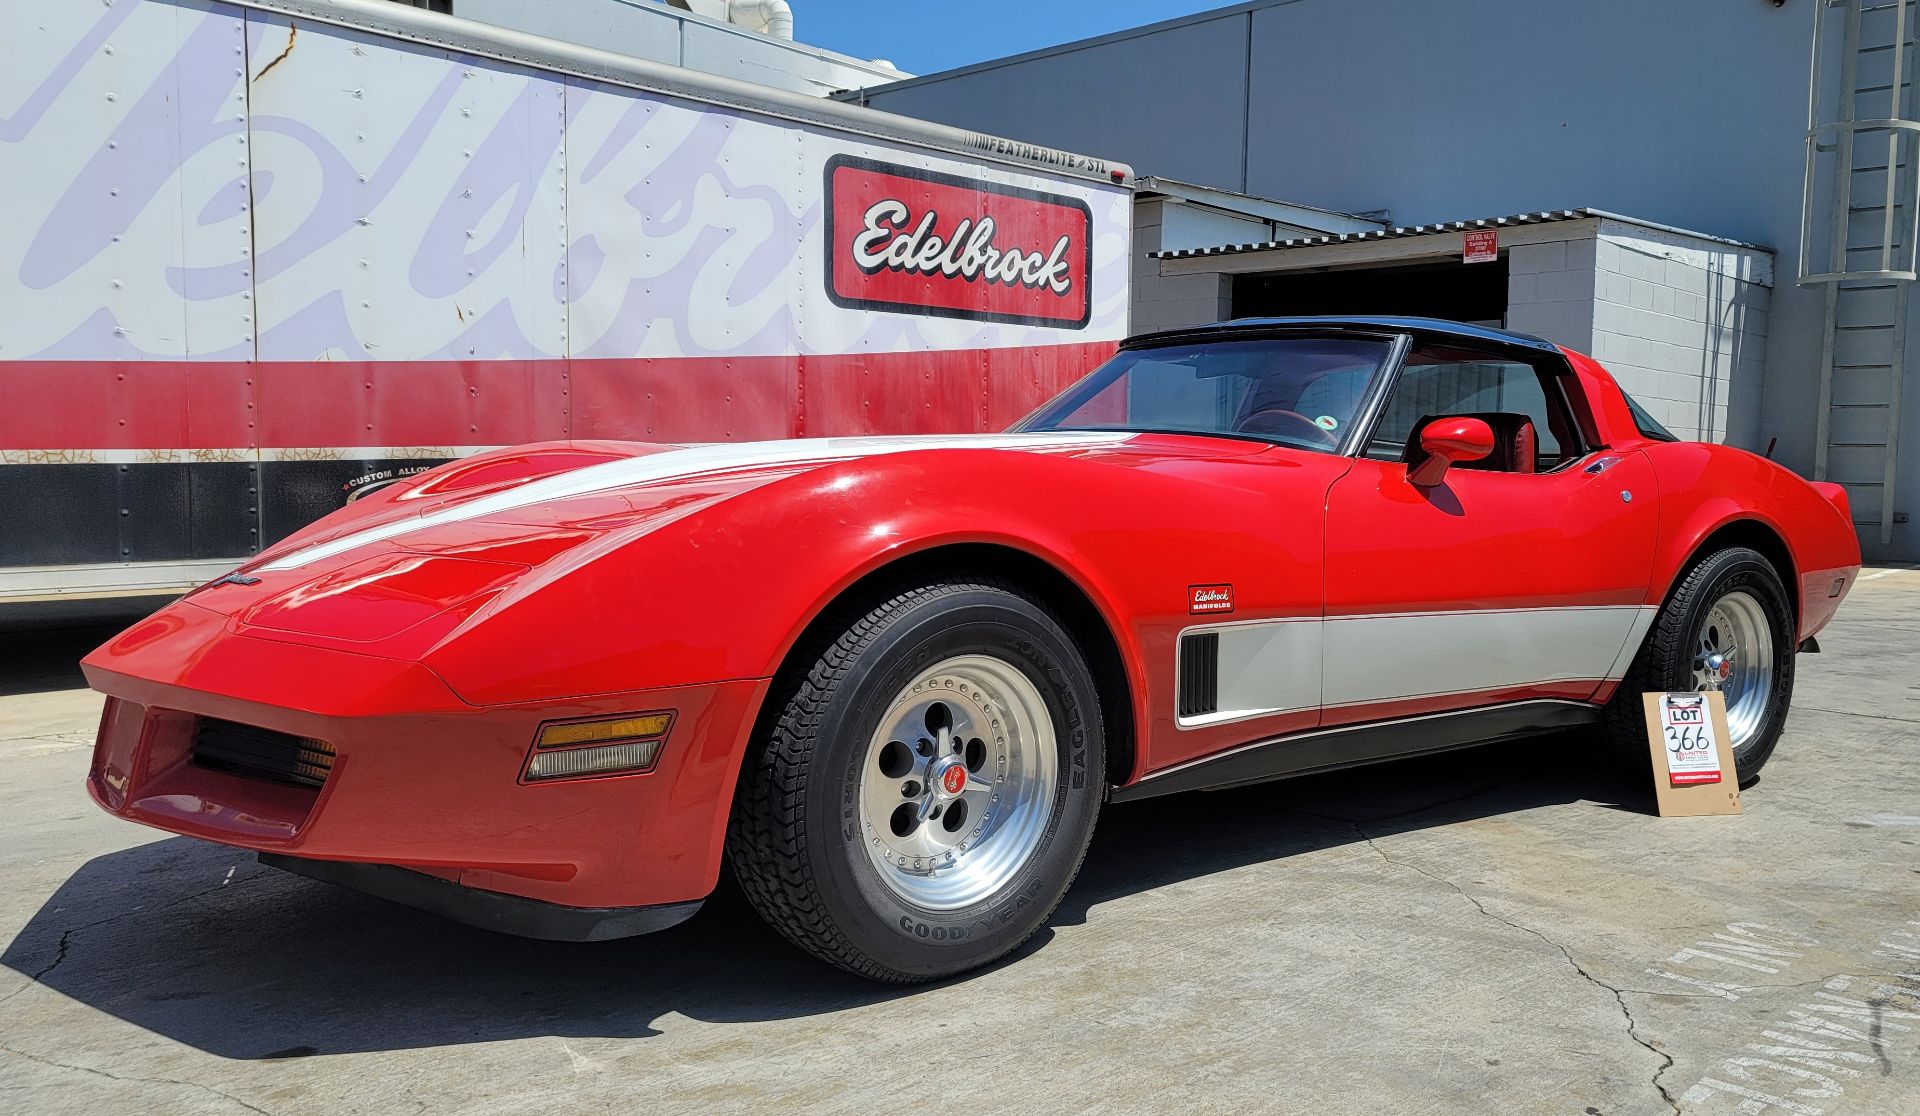 1980 CHEVROLET CORVETTE, WAS VIC EDELBROCK'S PERSONAL CAR BOUGHT FOR R&D, RED INTERIOR, TITLE ONLY. - Image 6 of 70